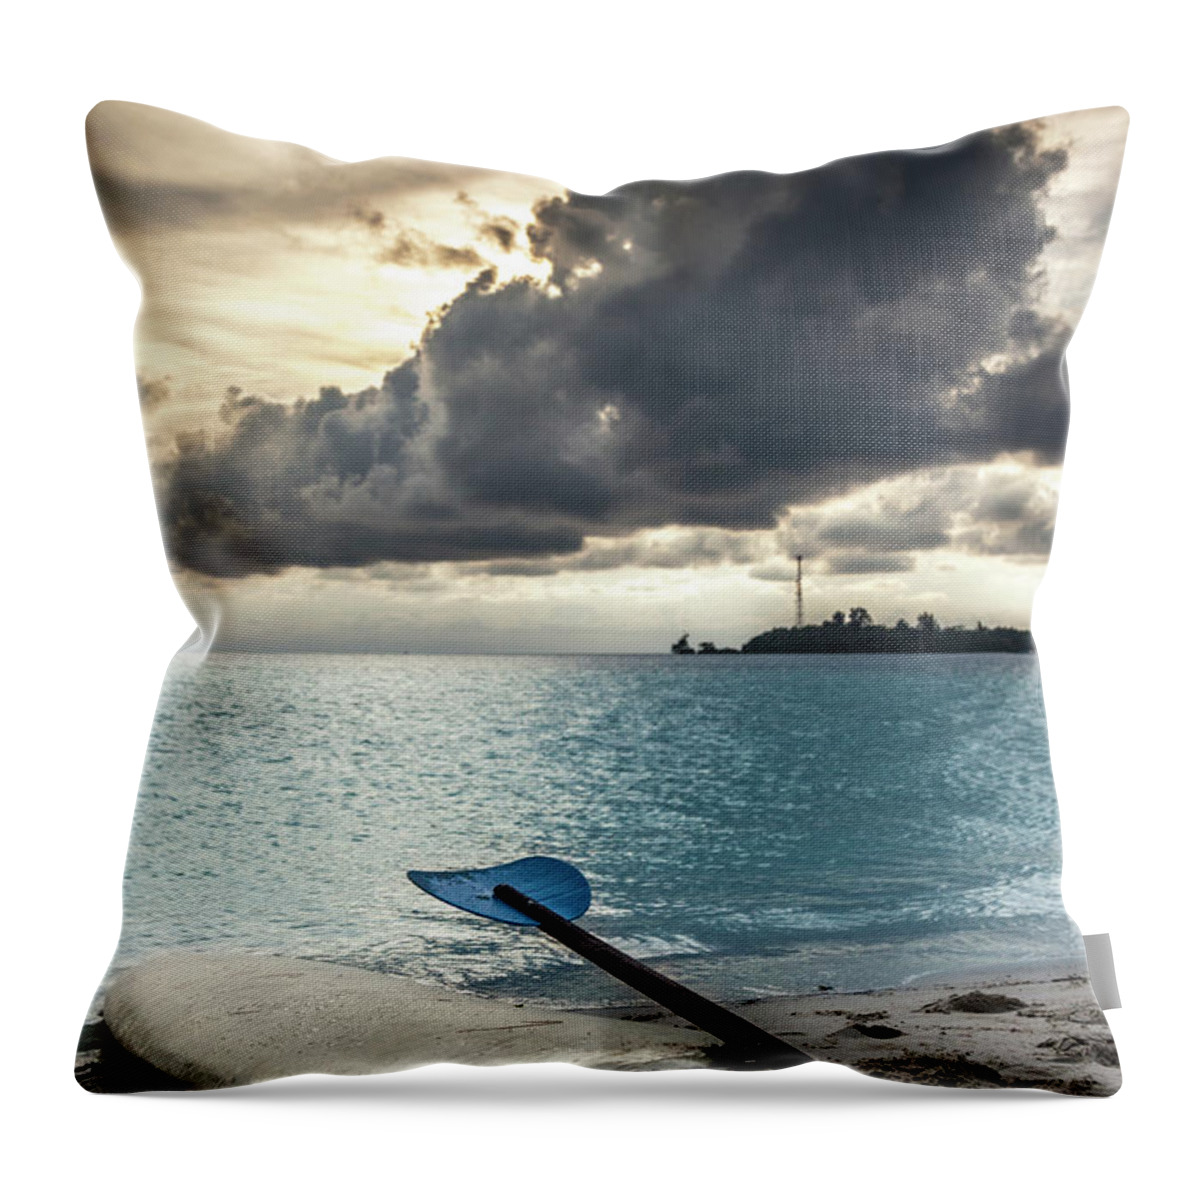 Tranquility Throw Pillow featuring the photograph Tiger Island Surf by Alexander Ipfelkofer